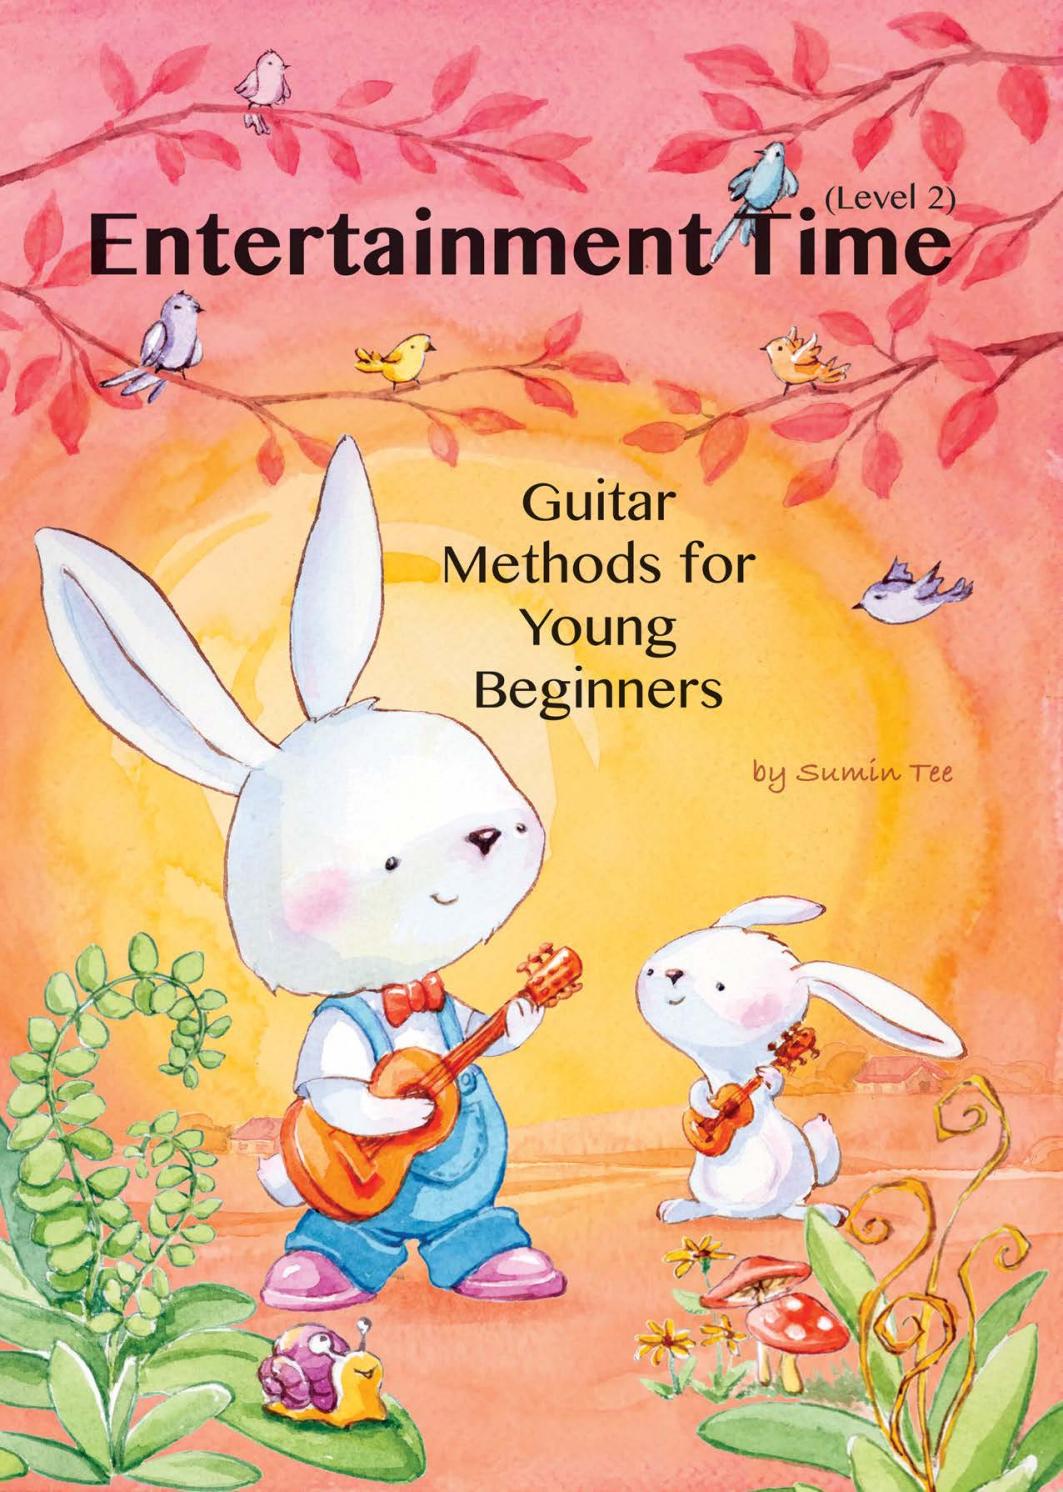 Guitar Methods for Young Beginners - Entertainment Time - Level 2 - soft cover